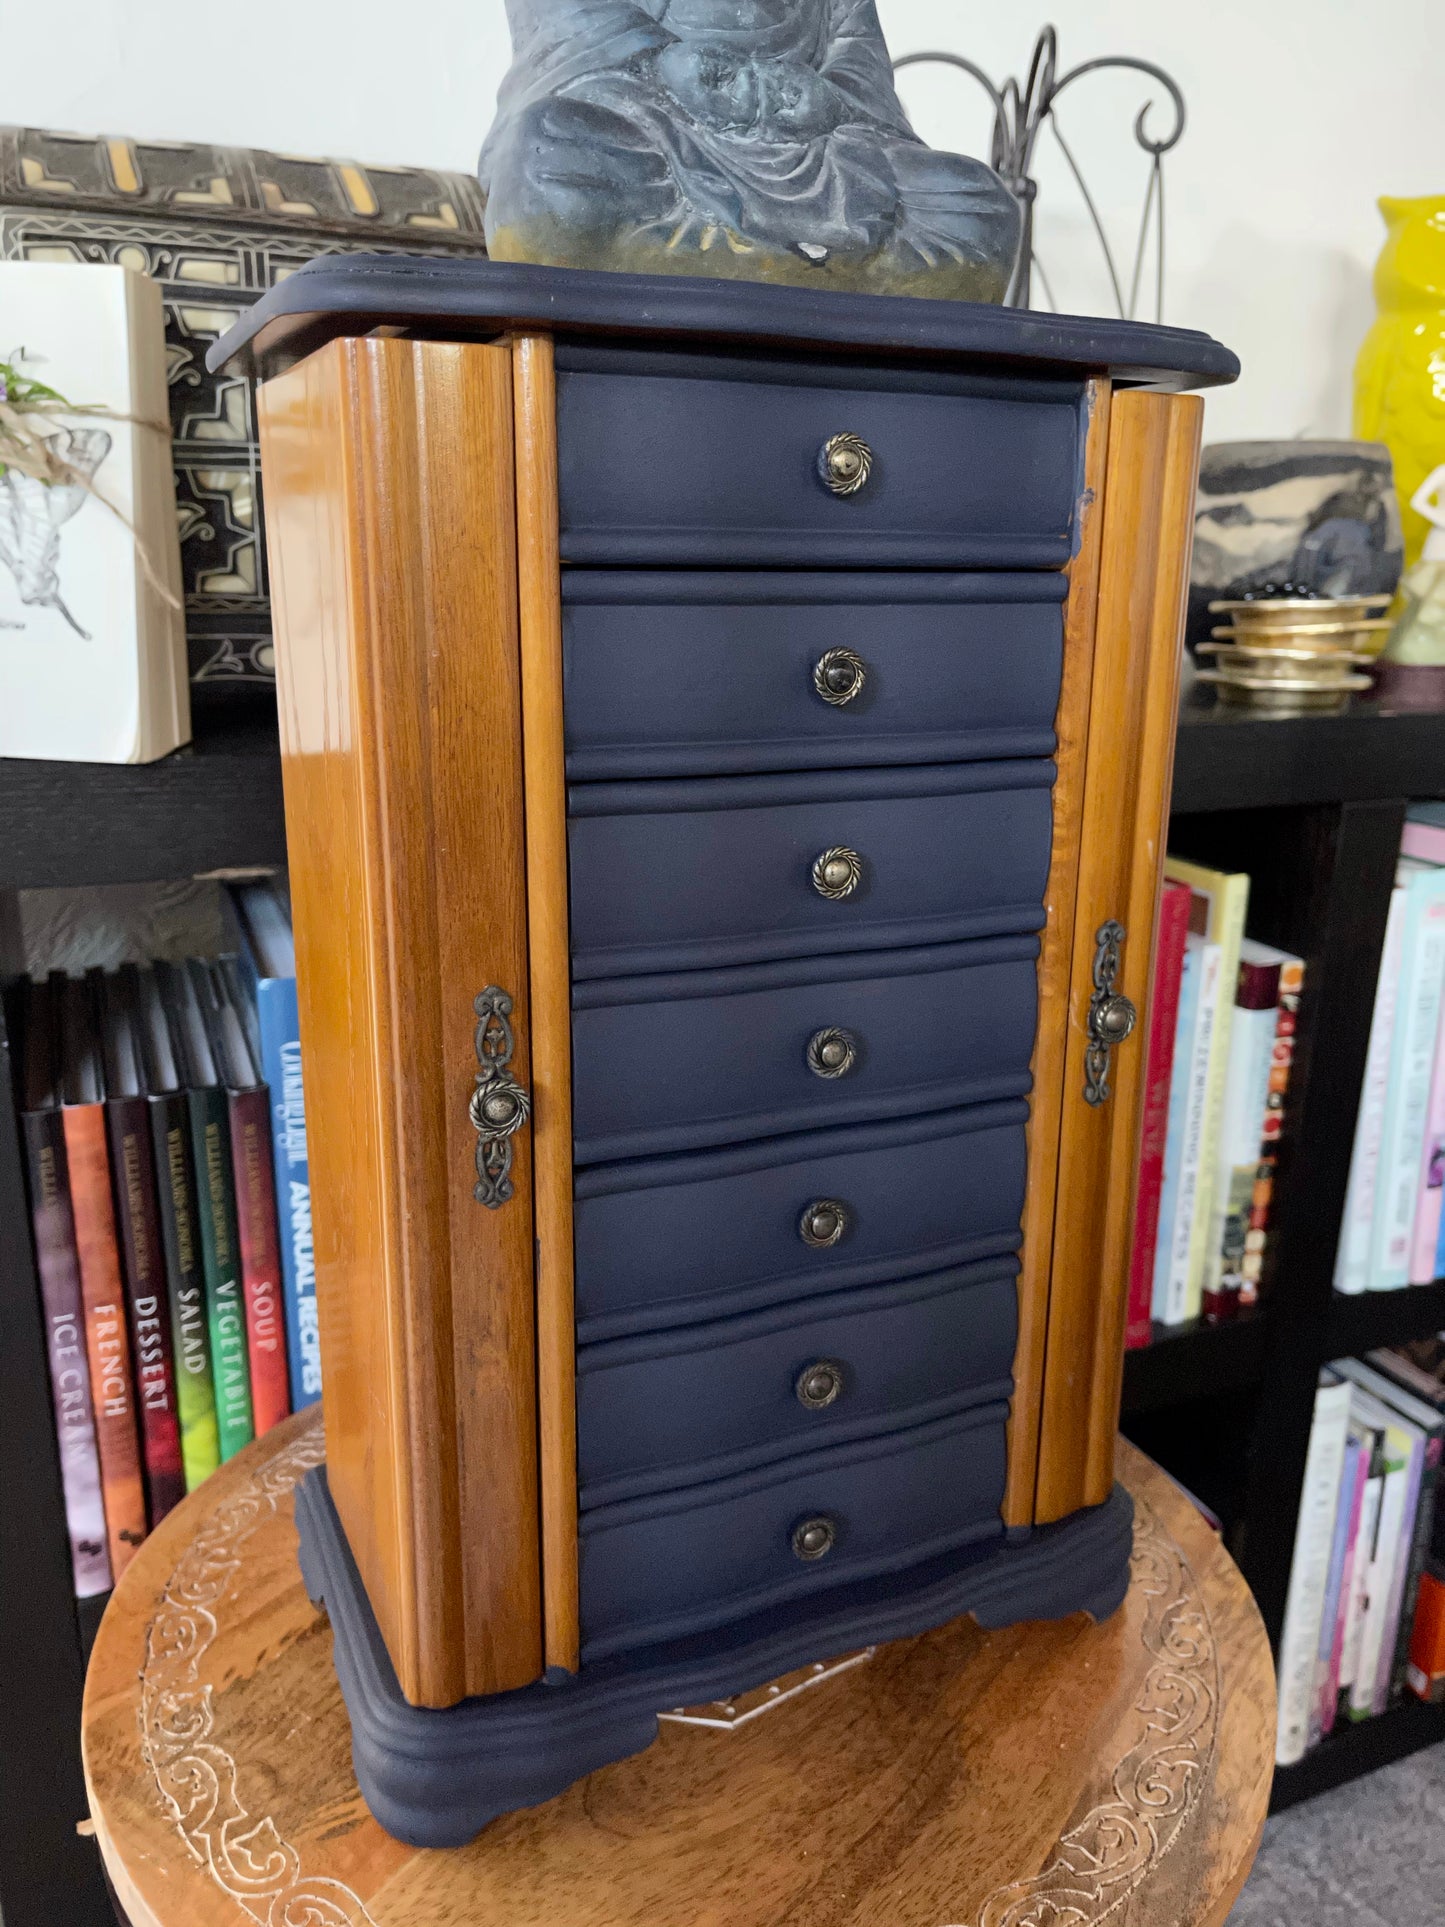 Lovecycled Vintage Jewelry Chest, His Hers Jewelry Cabinet